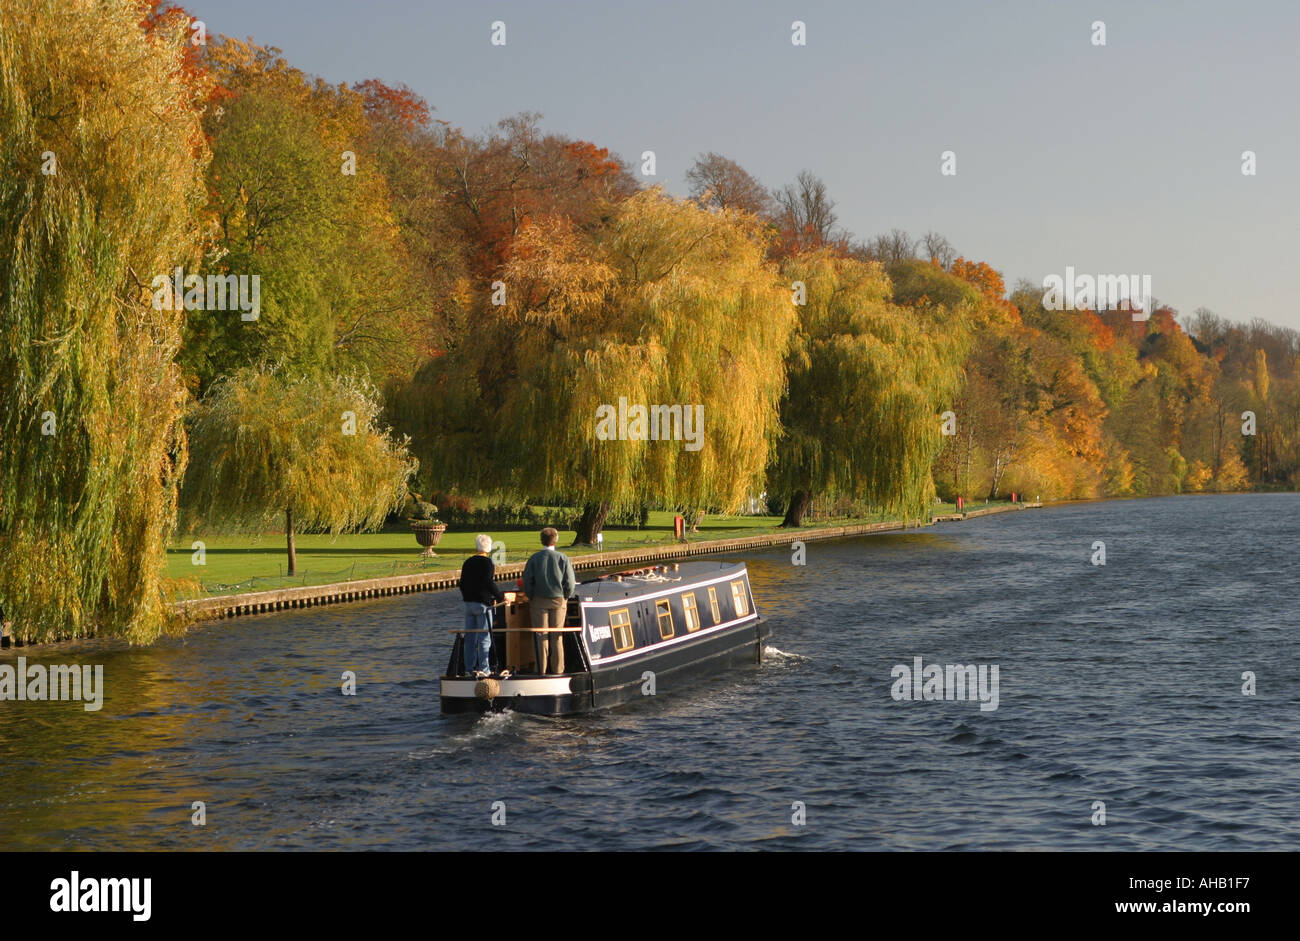 England River Thames in autumn Stock Photo